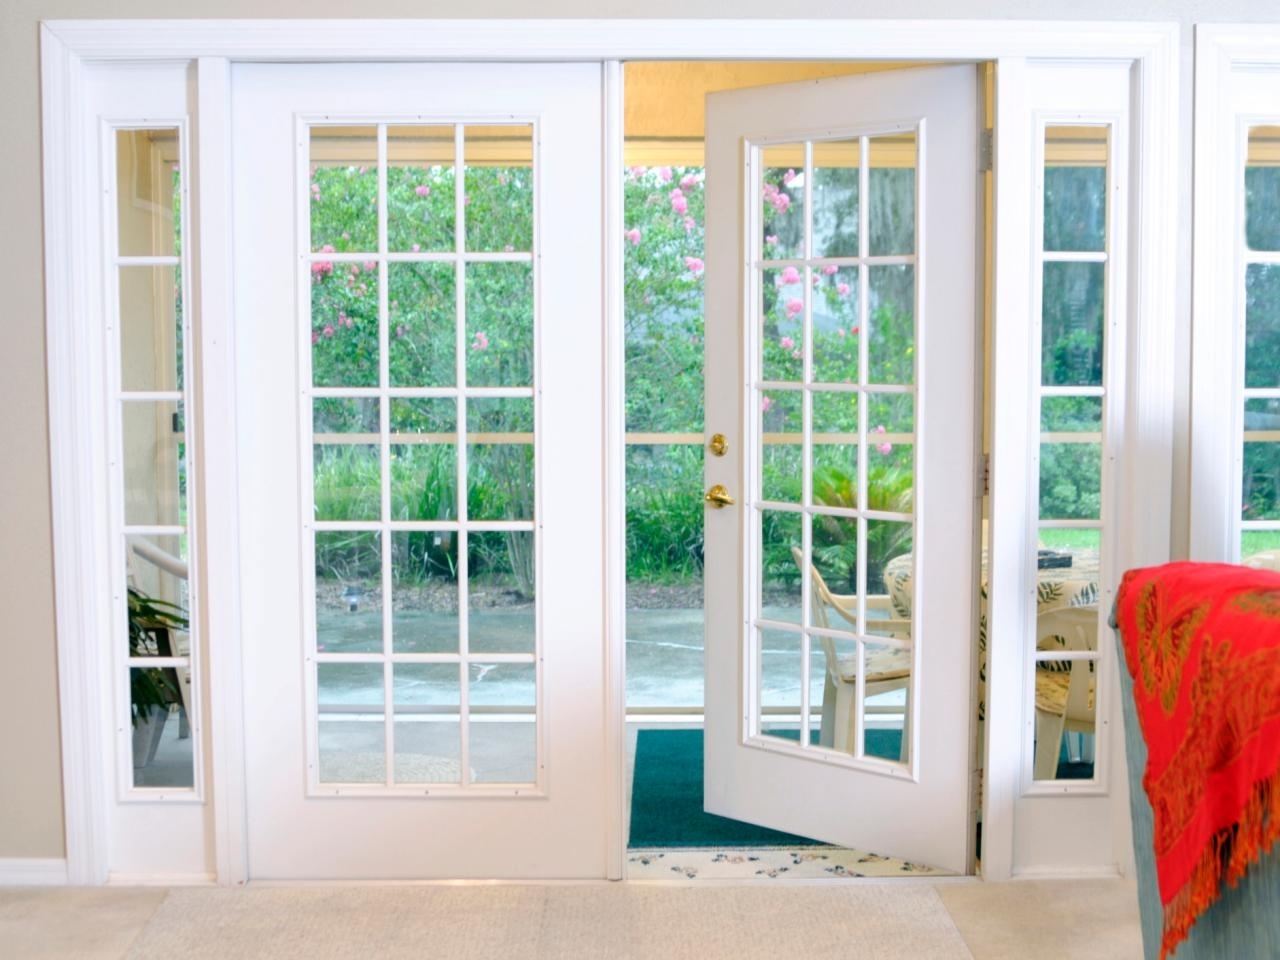 Stained Glass Sliding Patio Doorsstained glass sliding patio doors sliding doors design